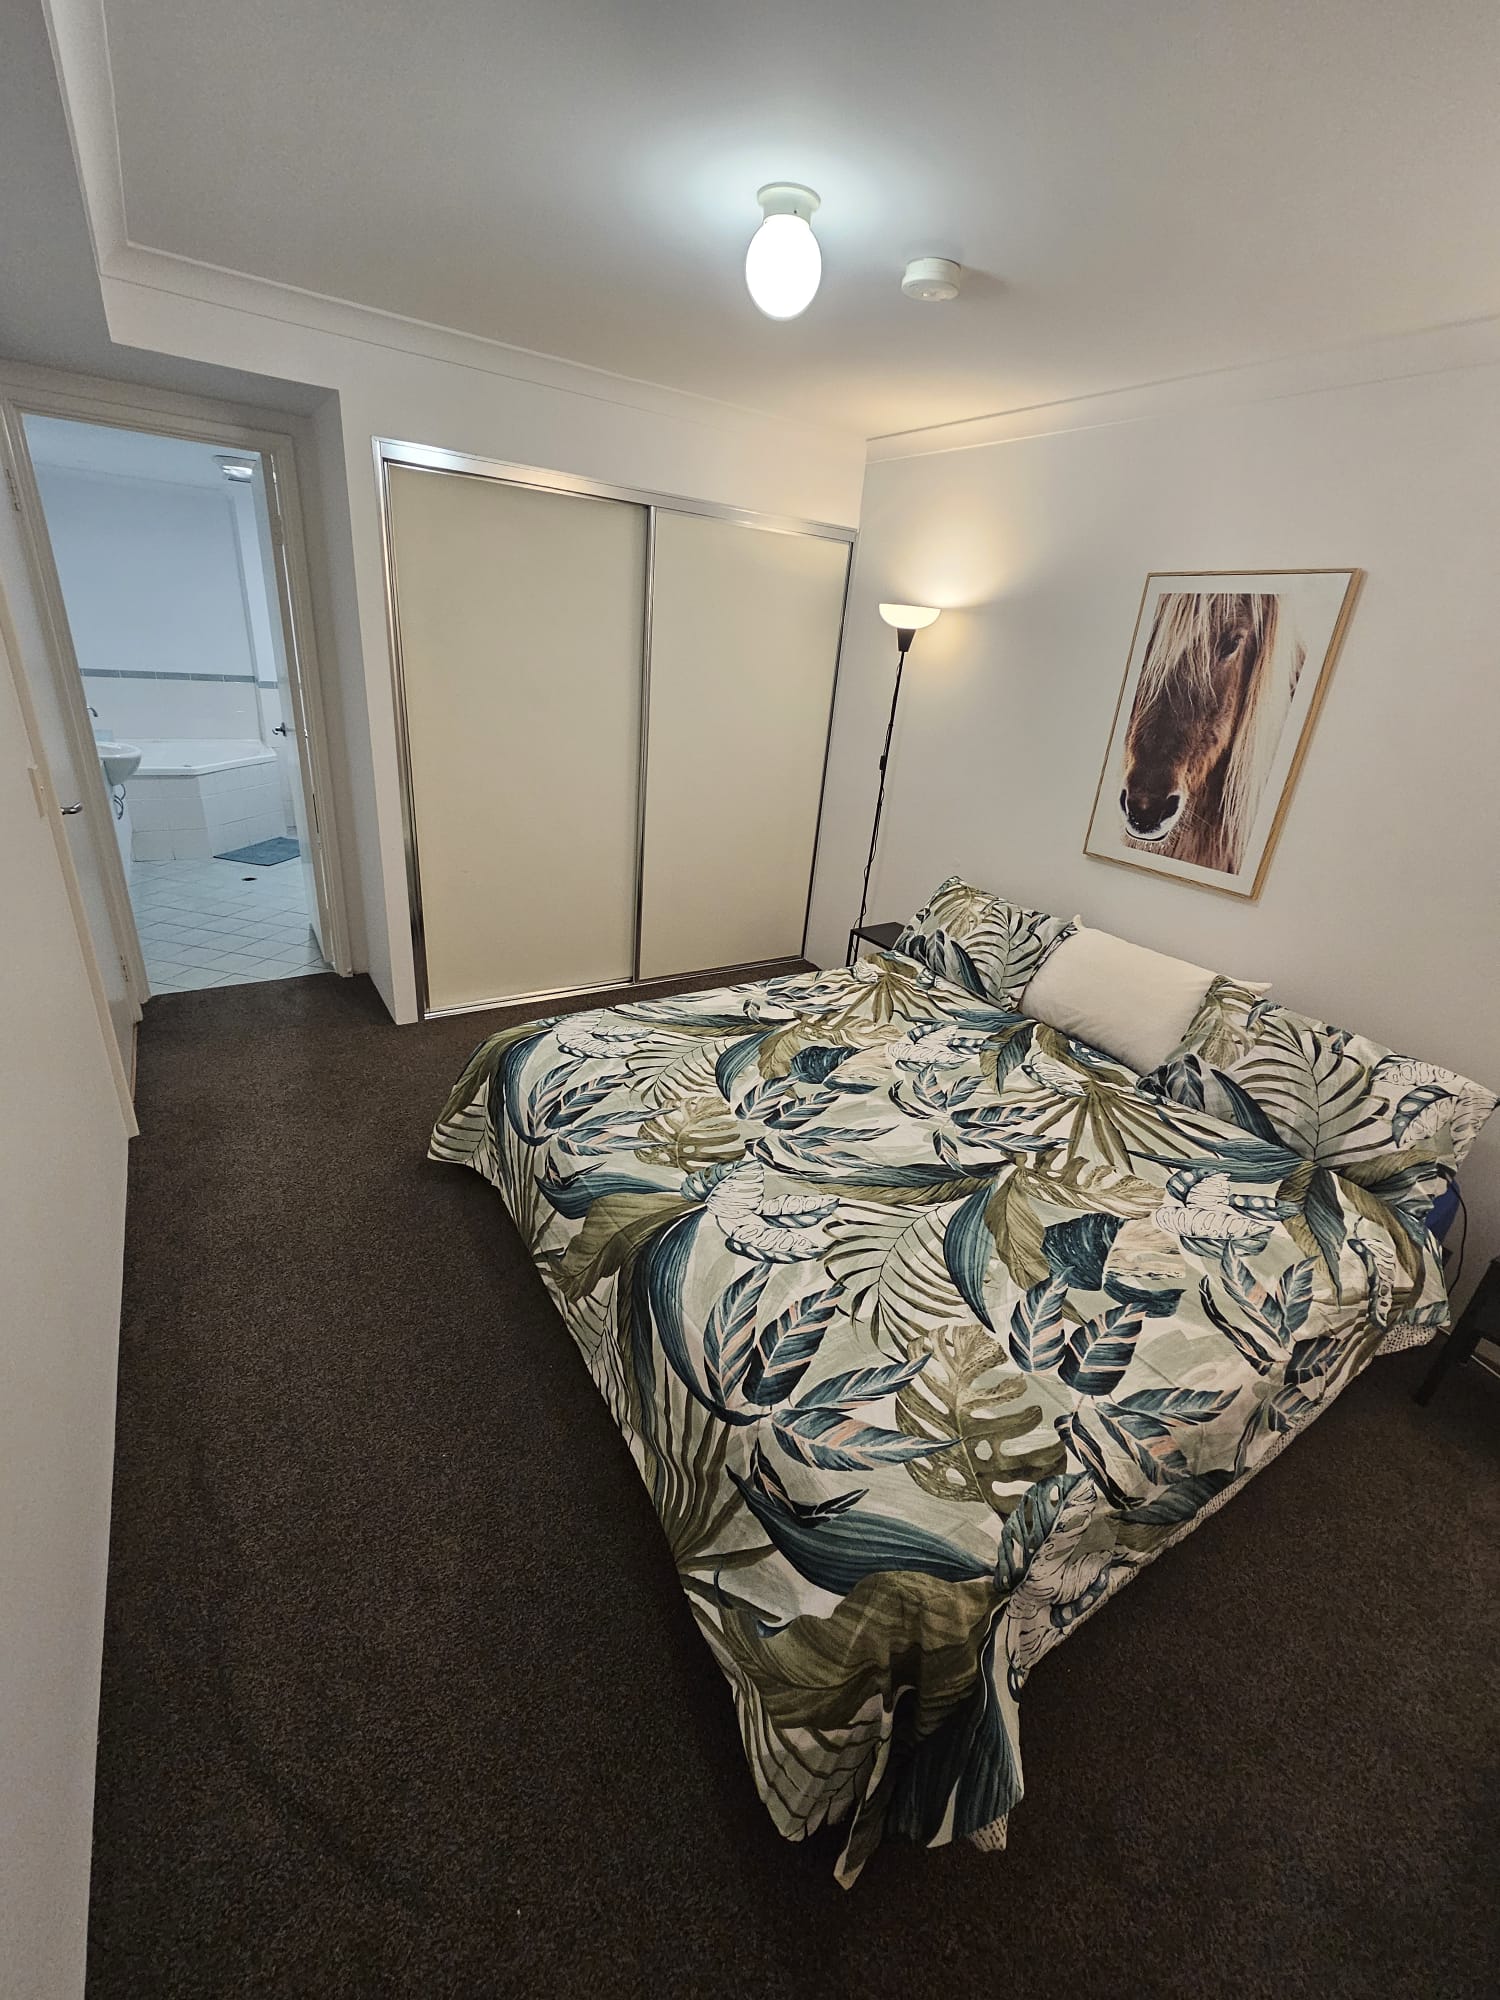 (Room1 wth Ensuite) 
7 Bennett St East Perth
2 bed x 2 bath